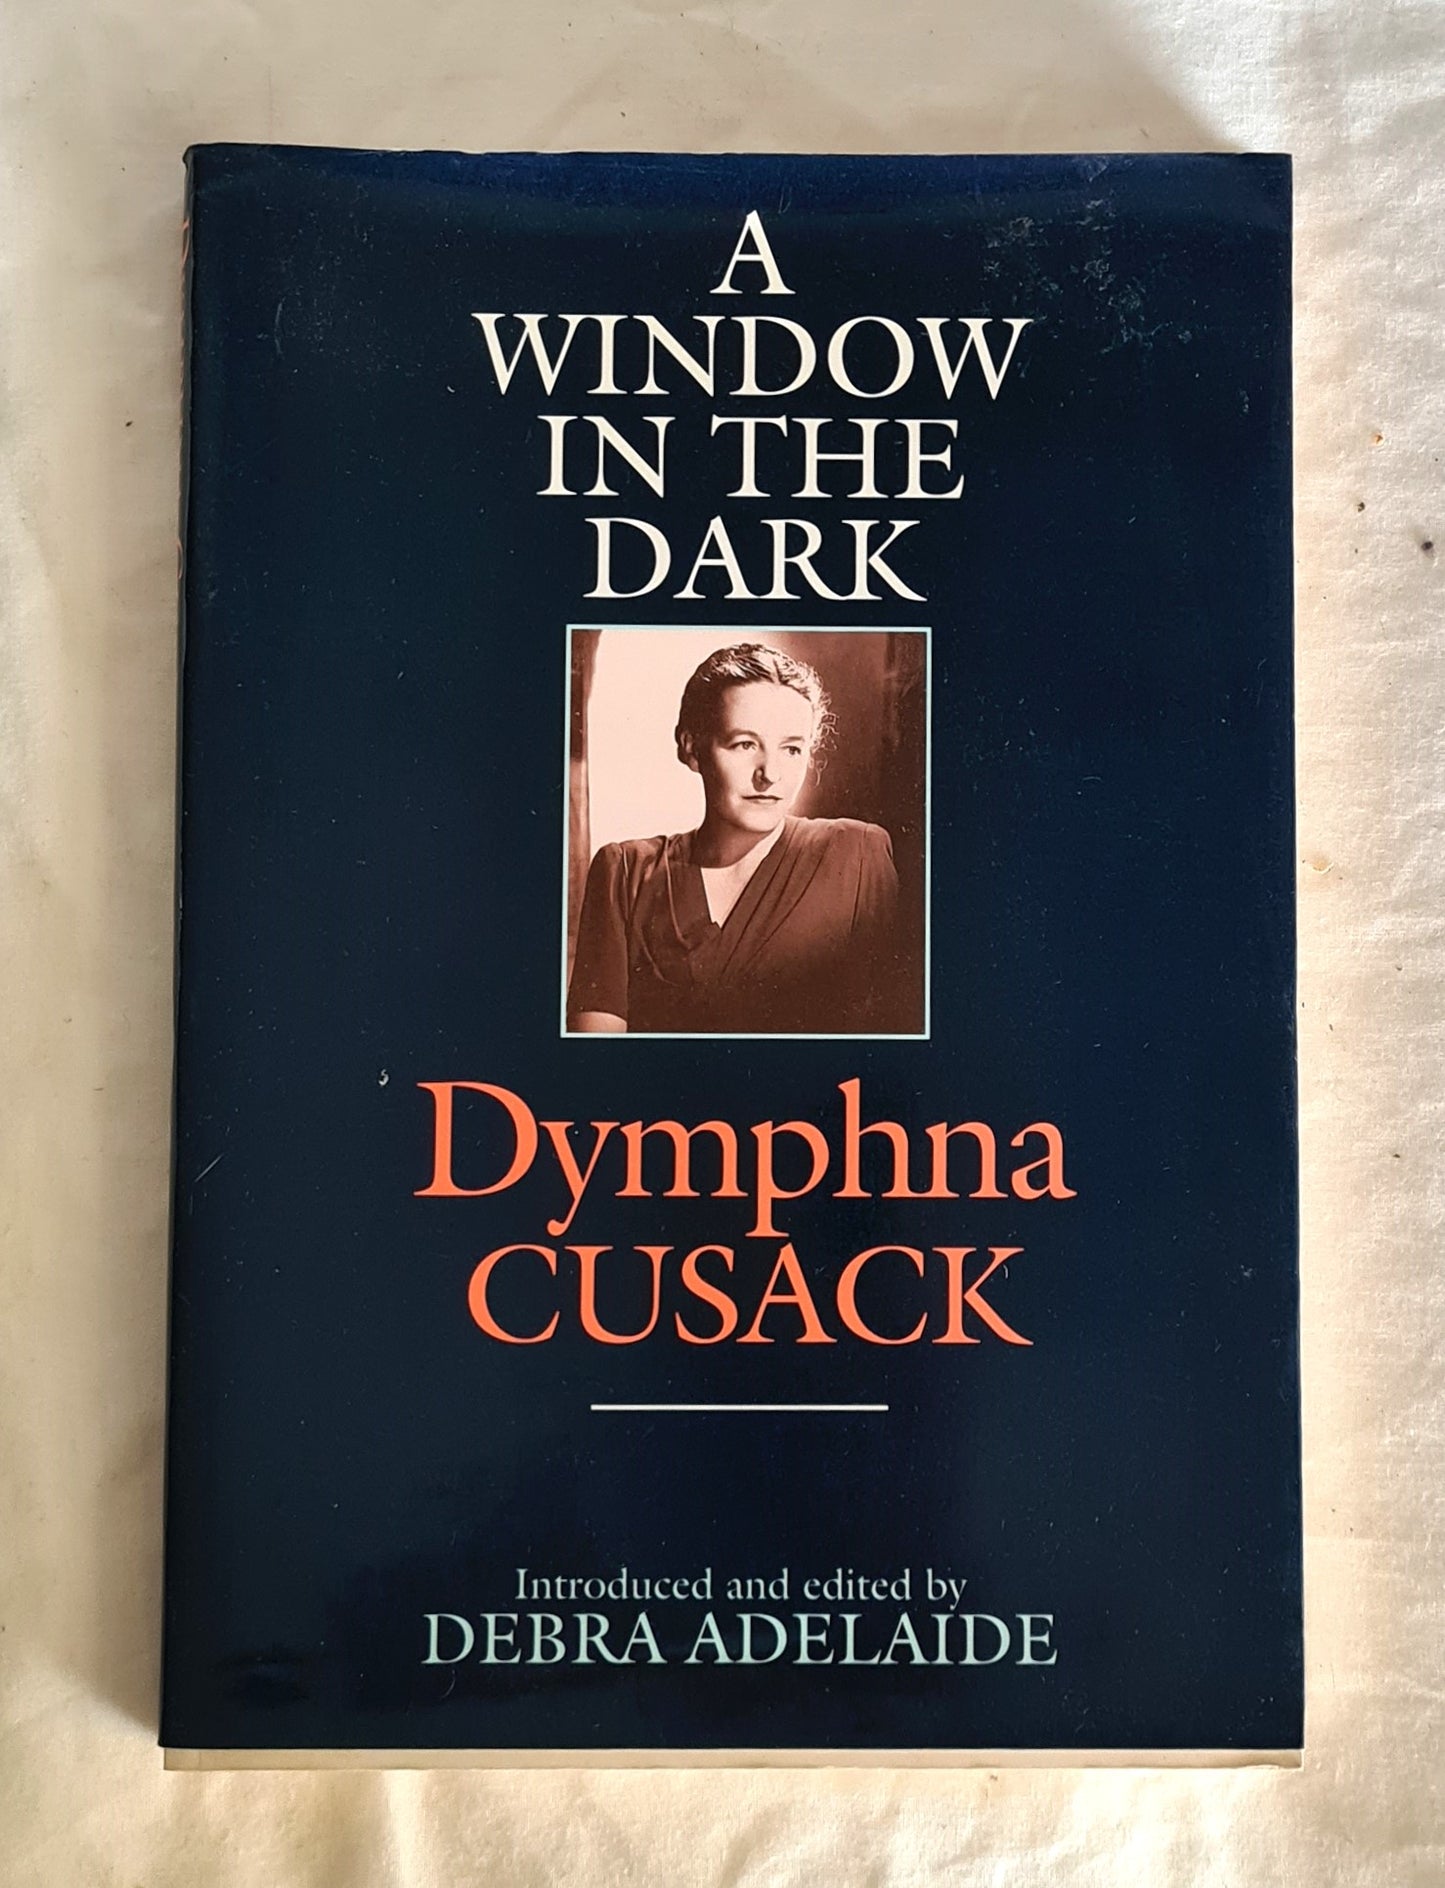 A Window in the Dark  by Dymphna Cusack  Introduced and edited by Debra Adelaide